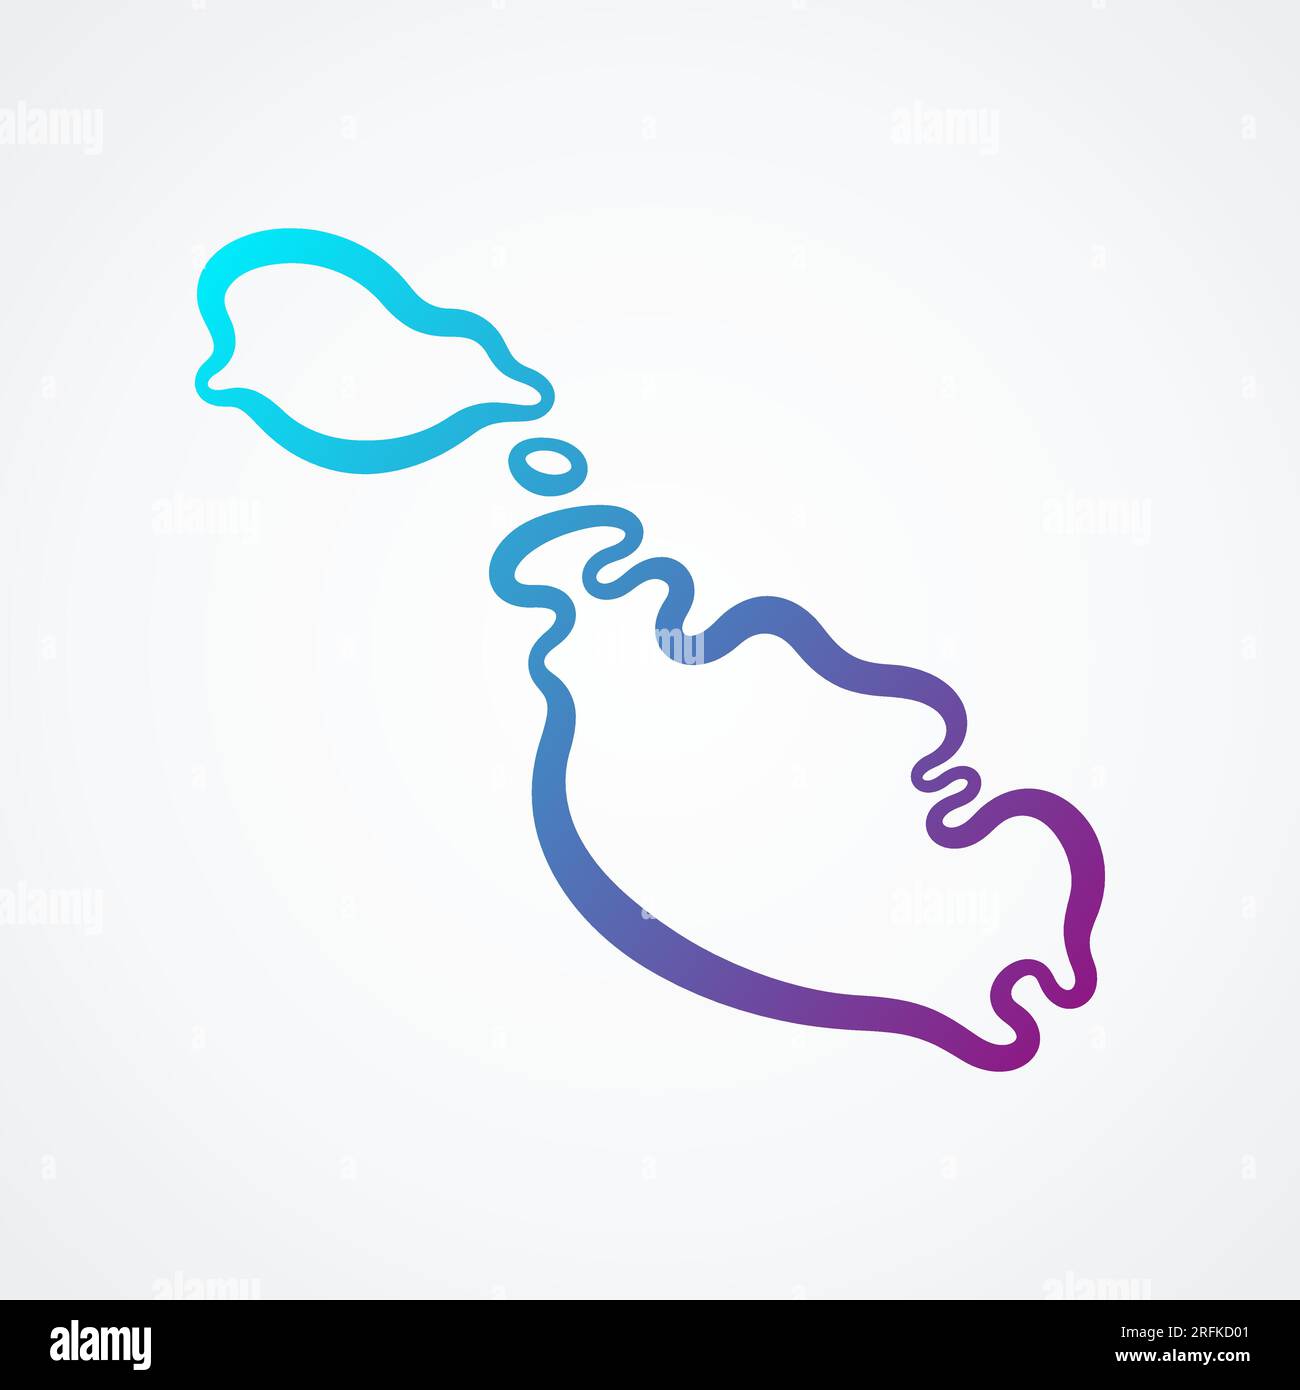 Outline map of Malta with blue-purple gradient. Stock Vector